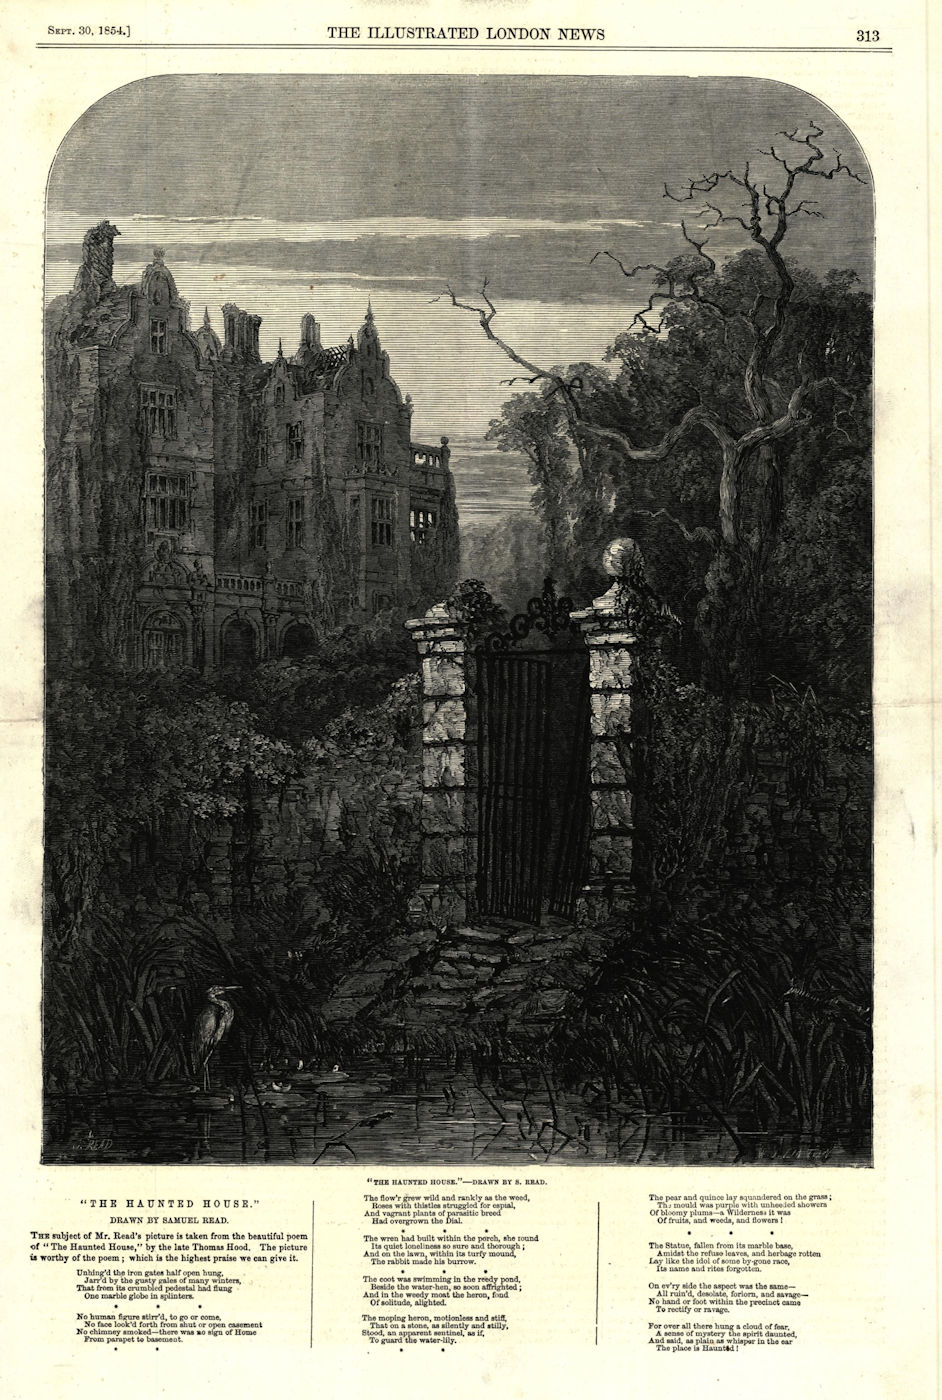 "The haunted house". Buildings. Fine arts 1854 antique ILN full page print